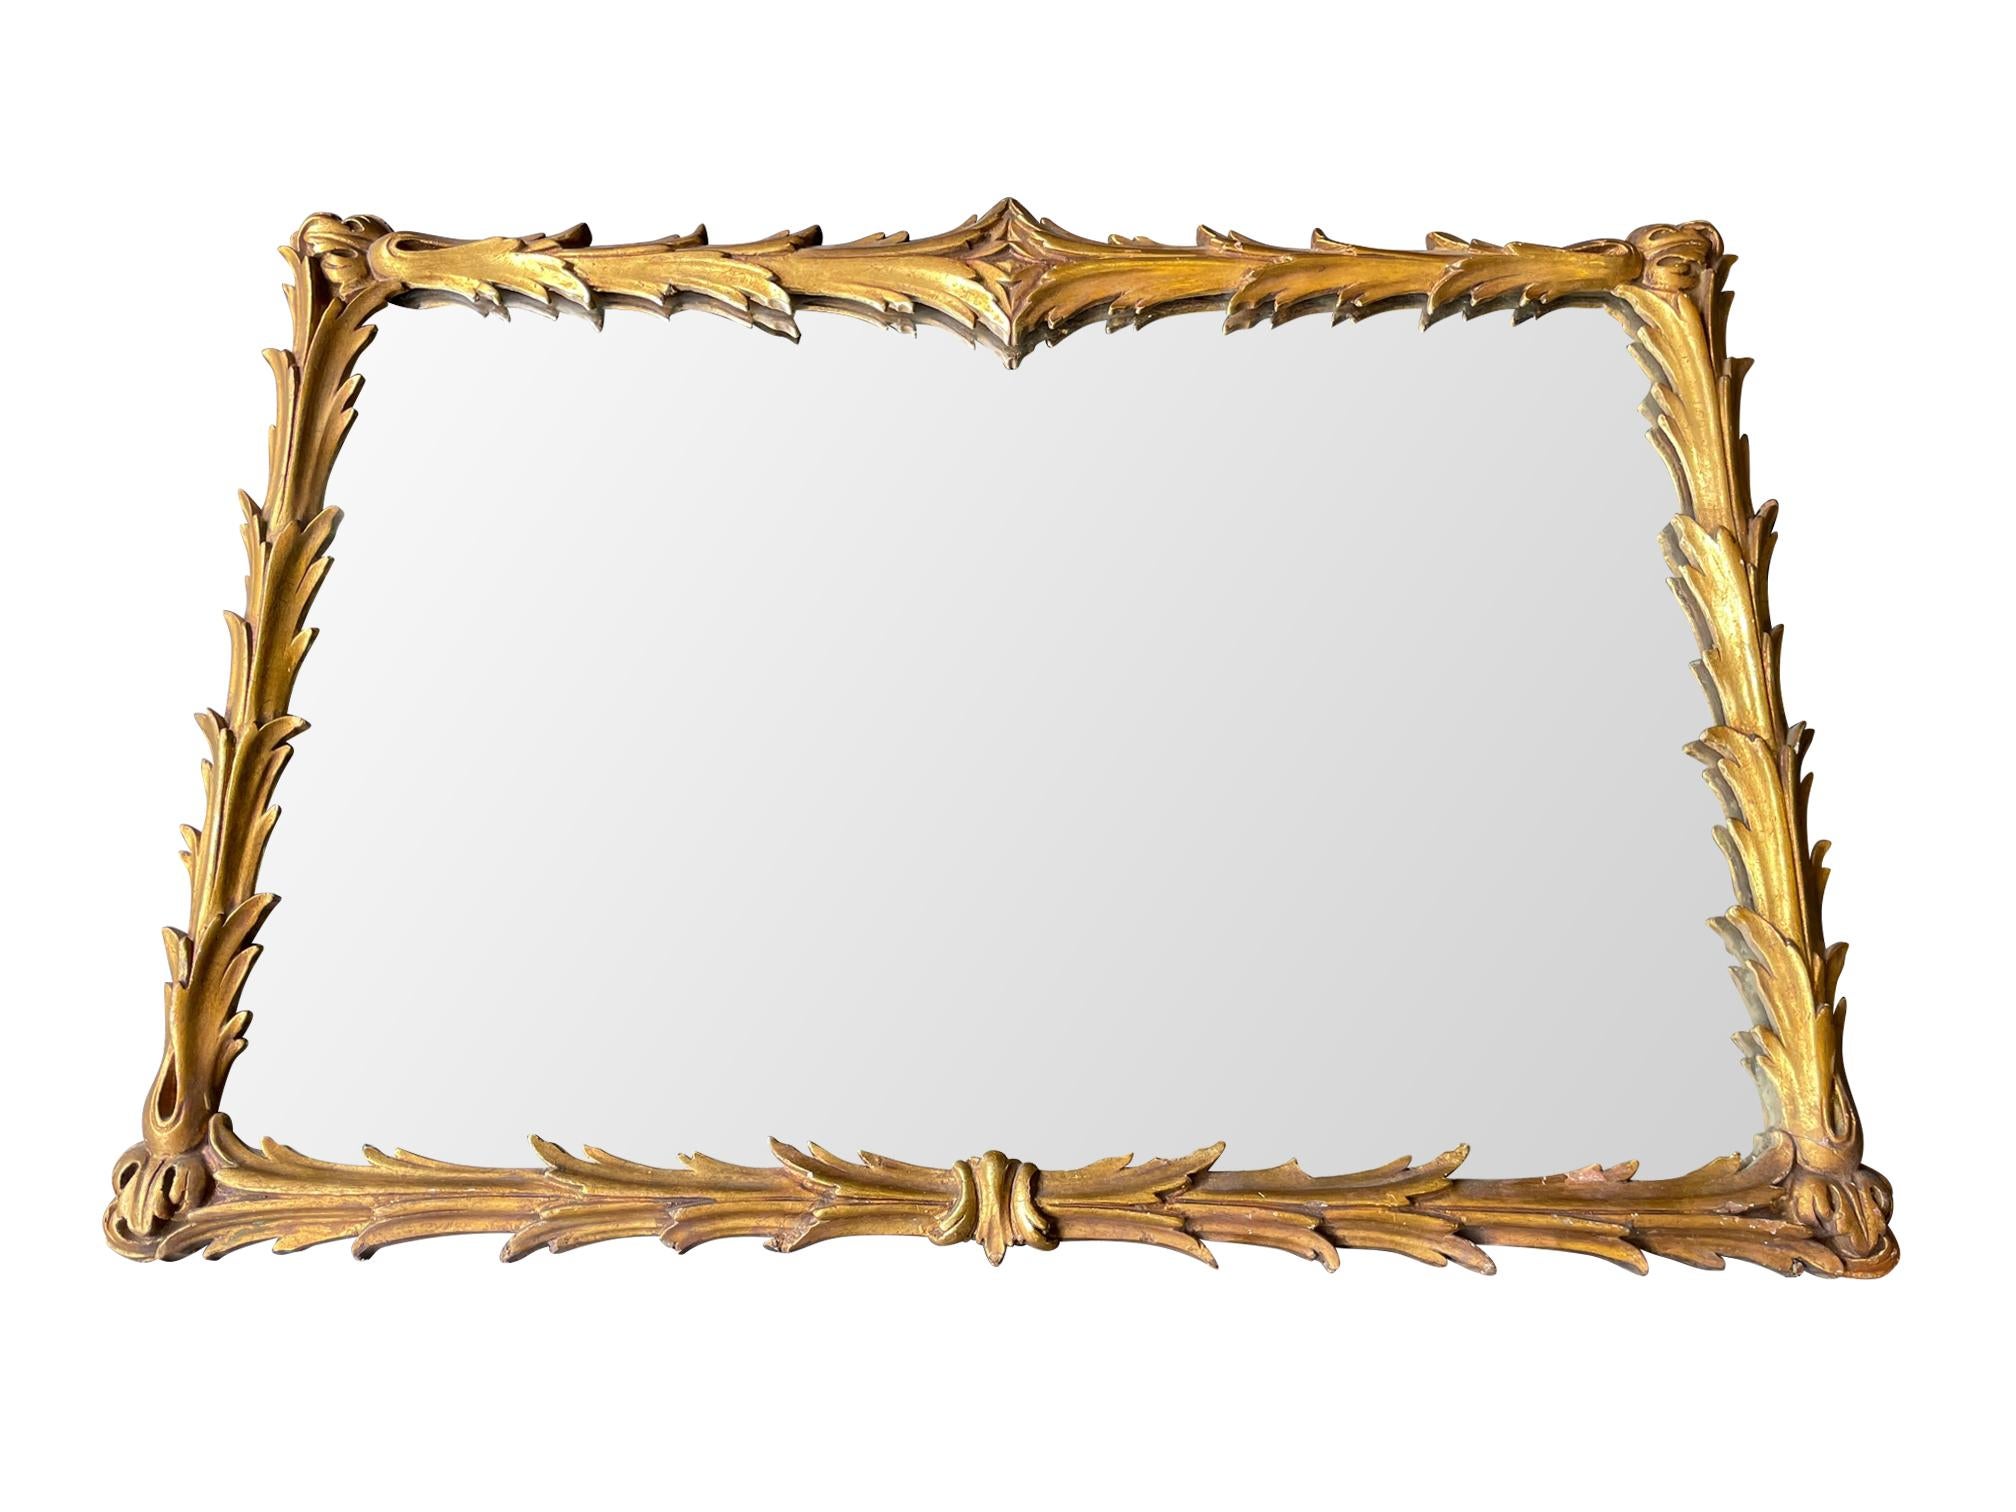 Lovely 1950s Italian Rectangular Rococo Style Gilt Gesso Acanthus Wall Mirror For Sale 3